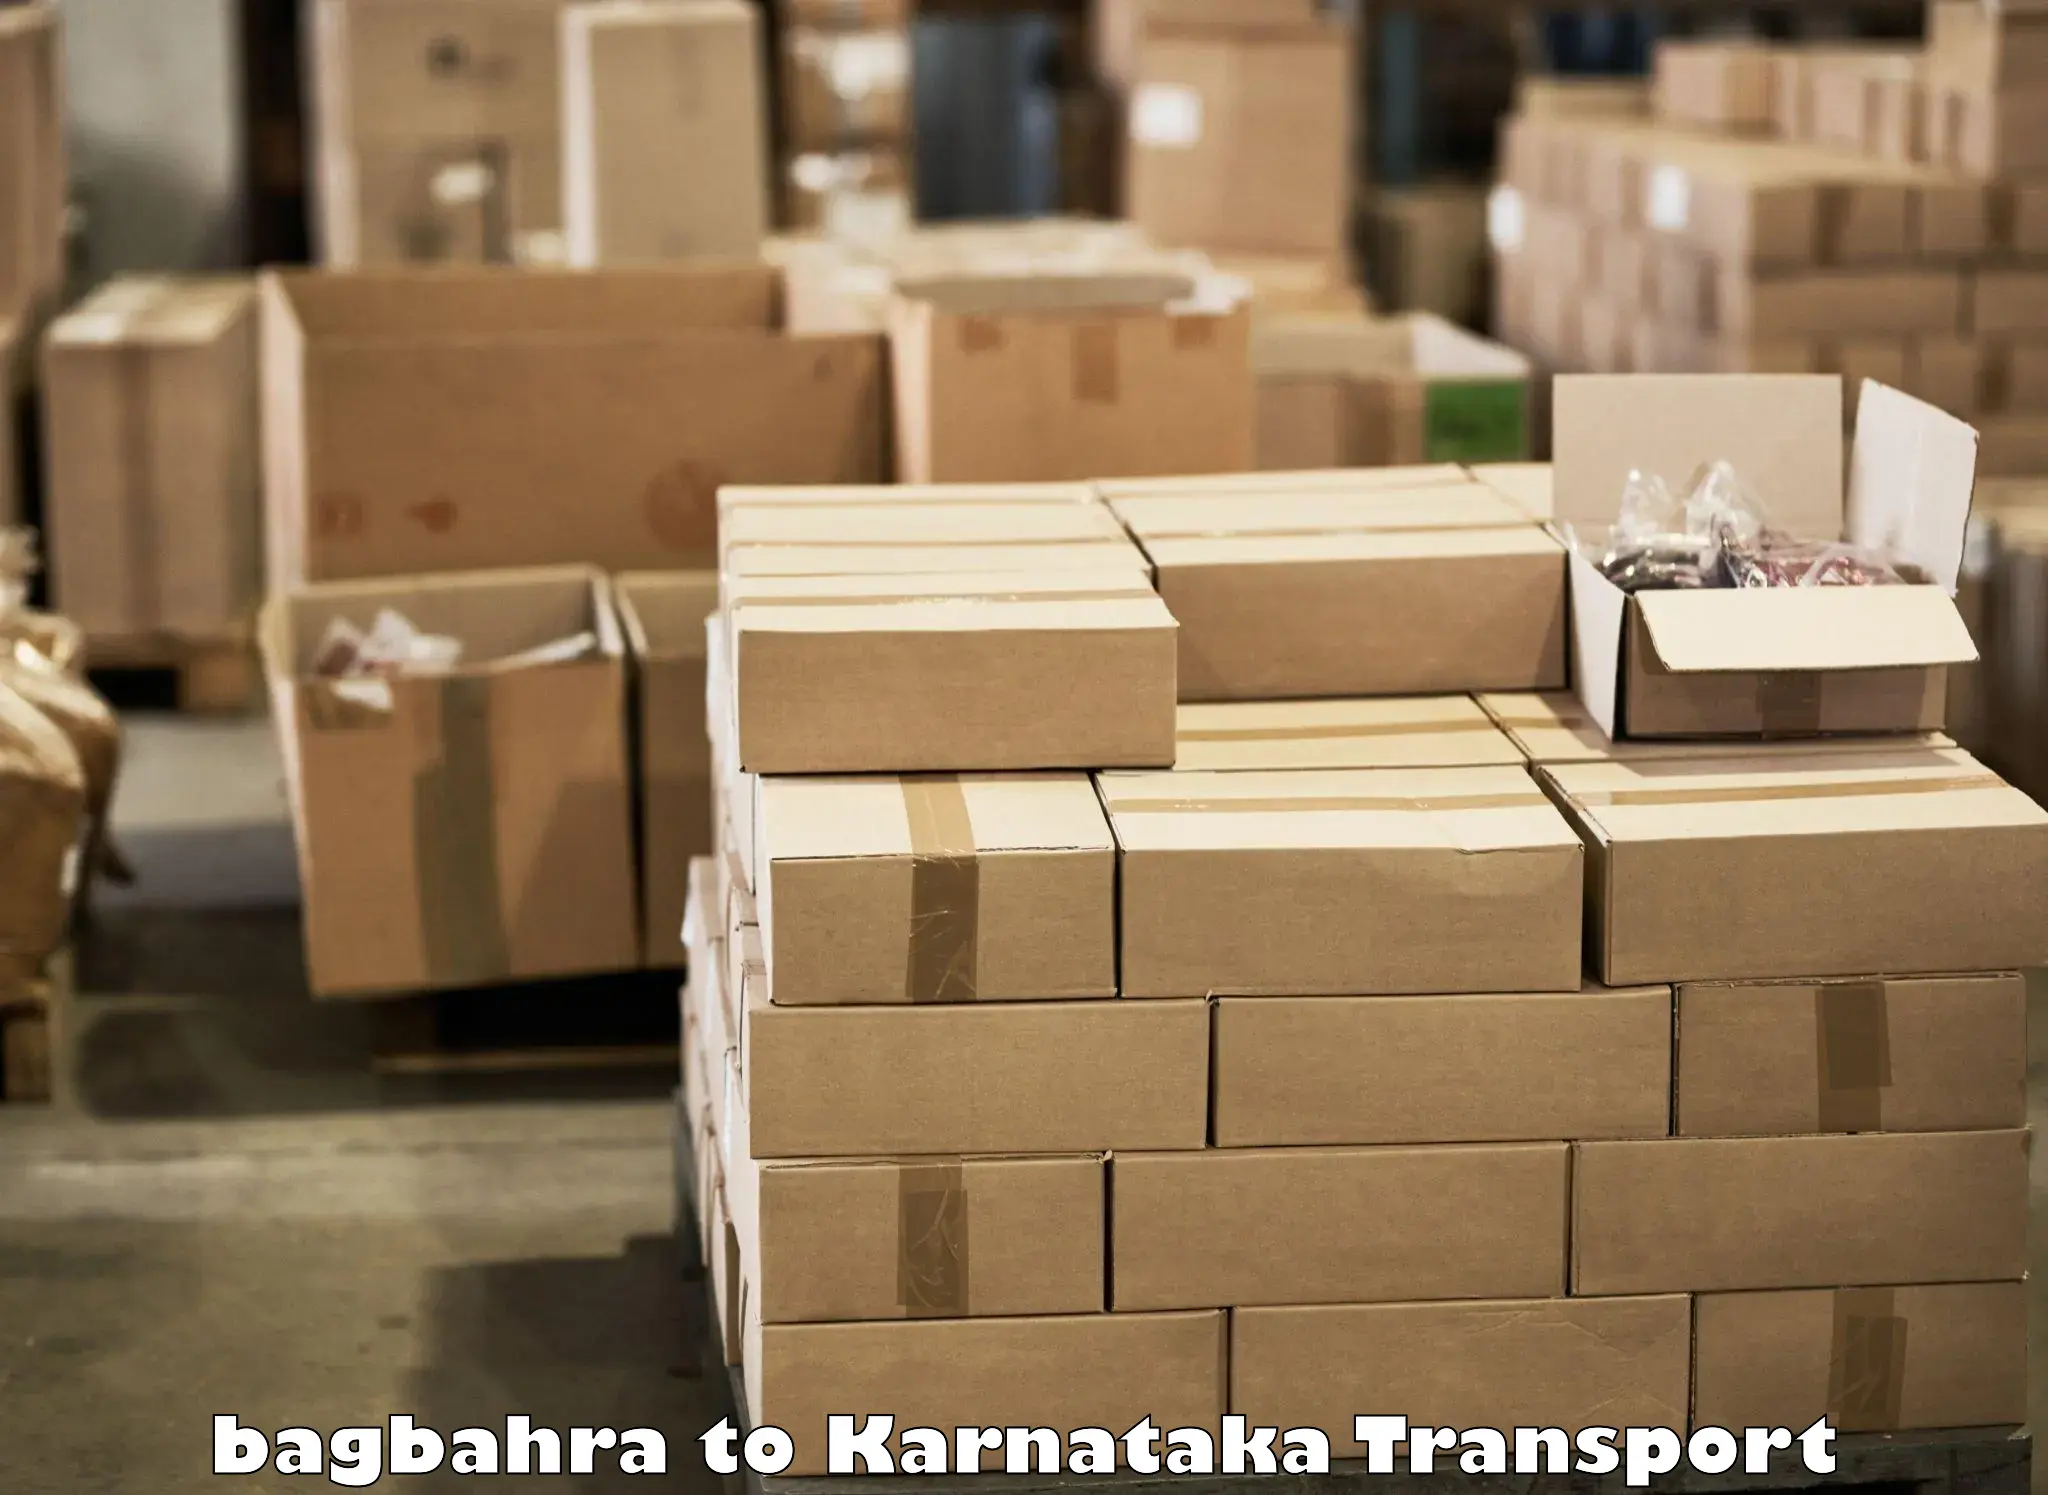 Goods delivery service bagbahra to Hosanagar